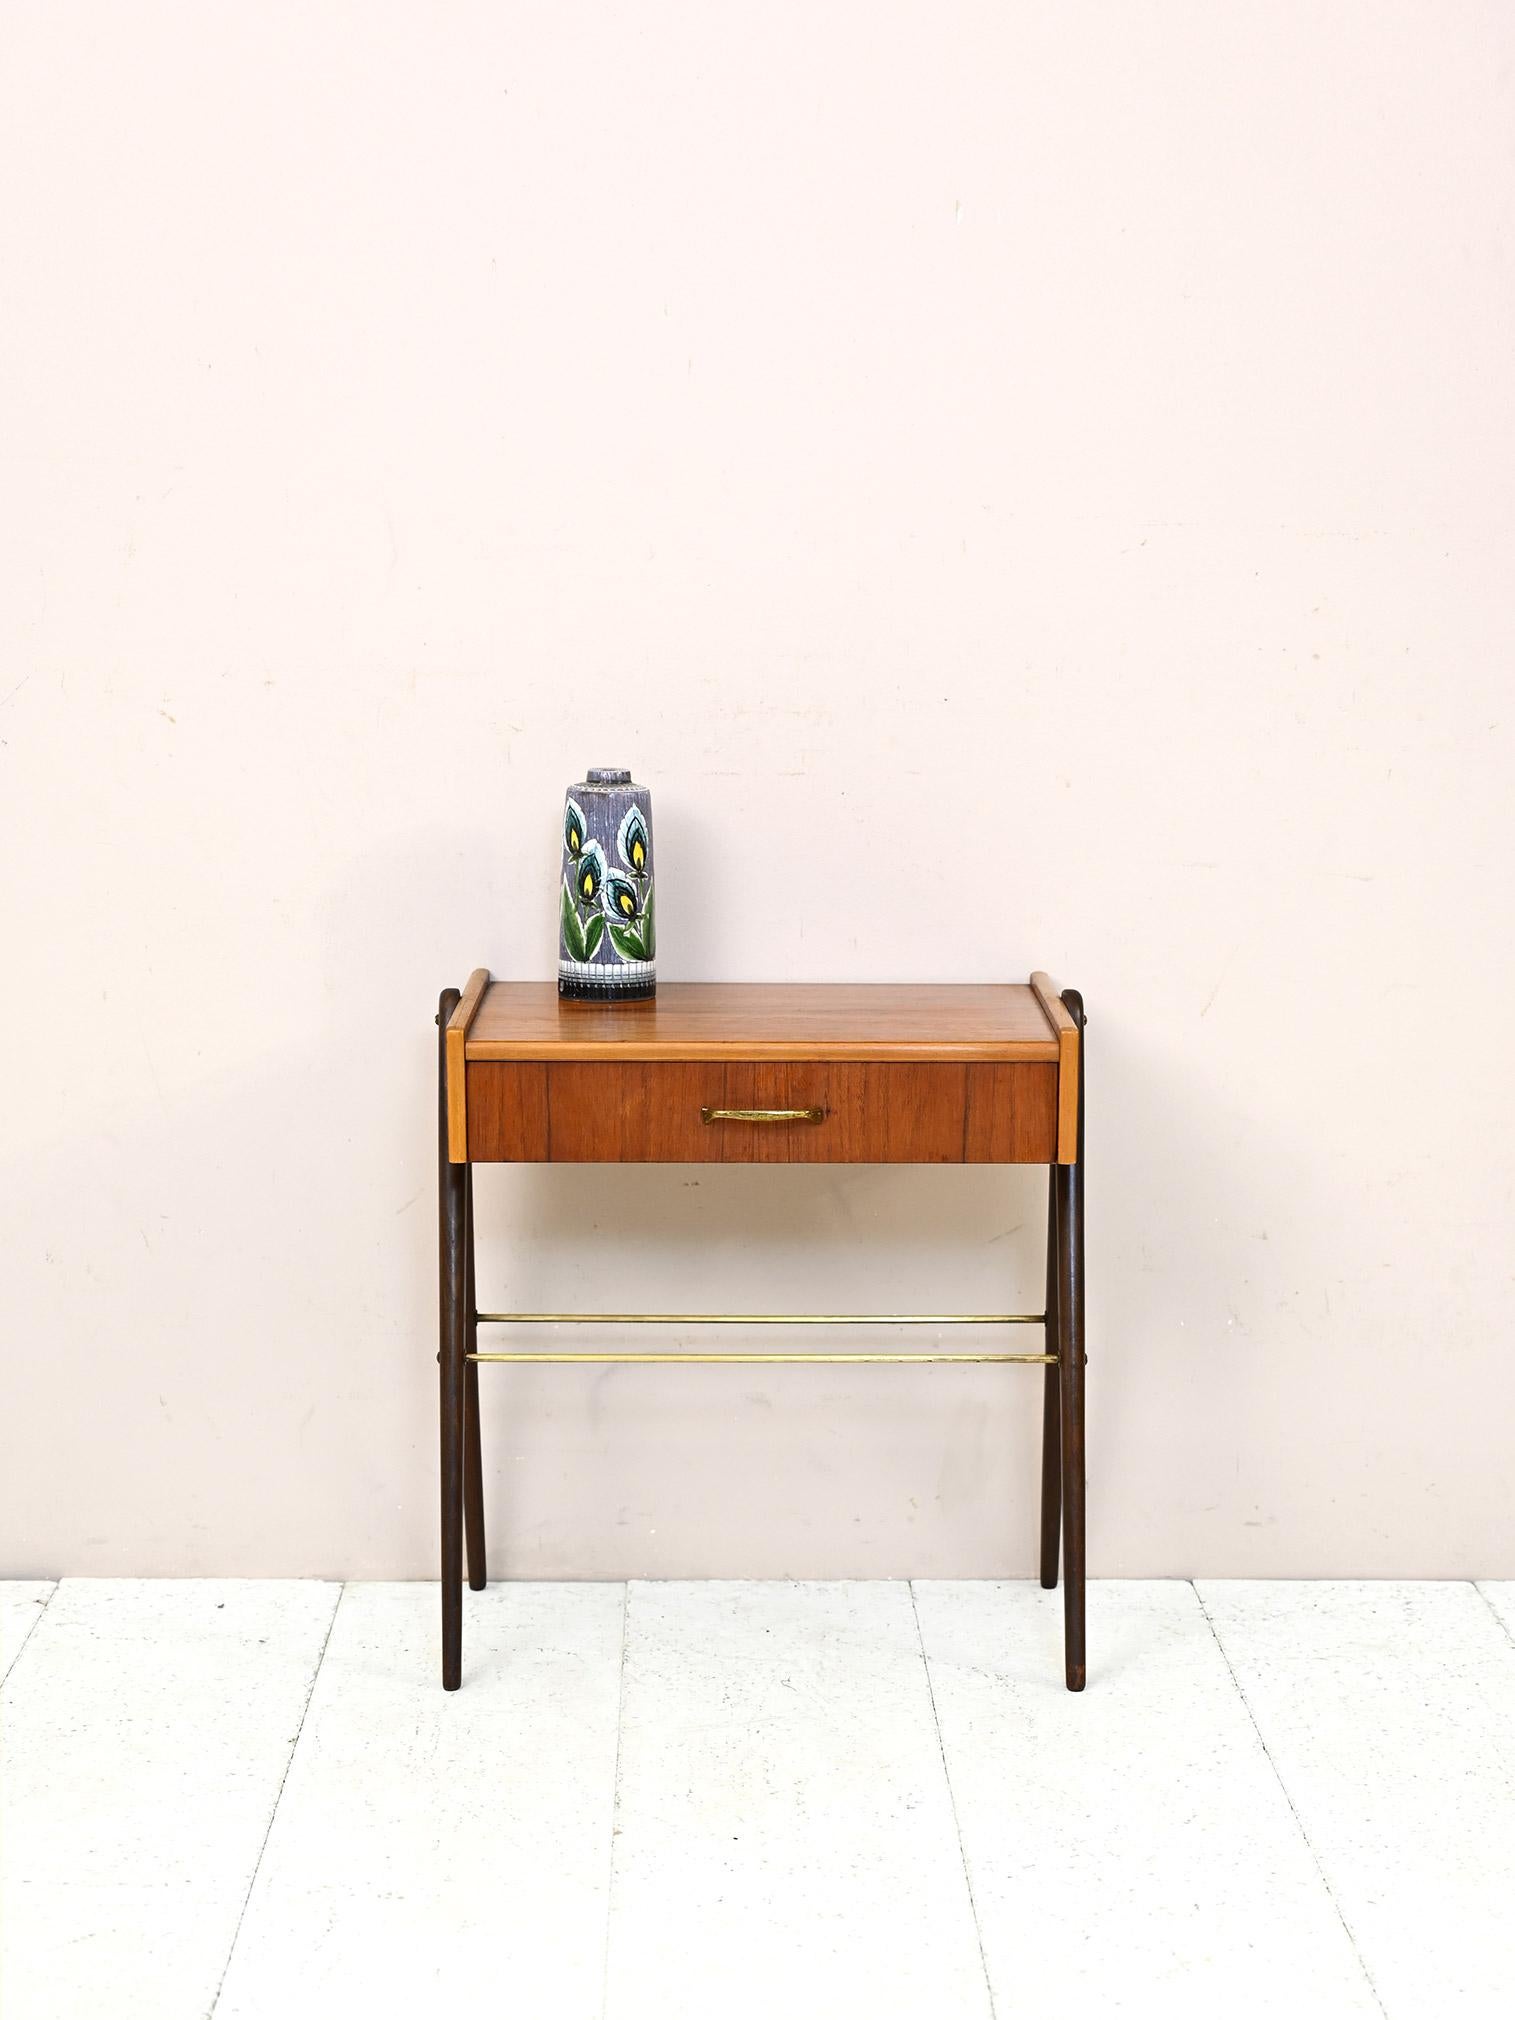 Vintage 1950s nightstand with drawer and magazine shelf.
 
Elegant and functional, this Scandinavian-made nightstand features modern lines and attention to detail.
 
The frame features V-shaped legs, a convenient drawer with brass handle and a